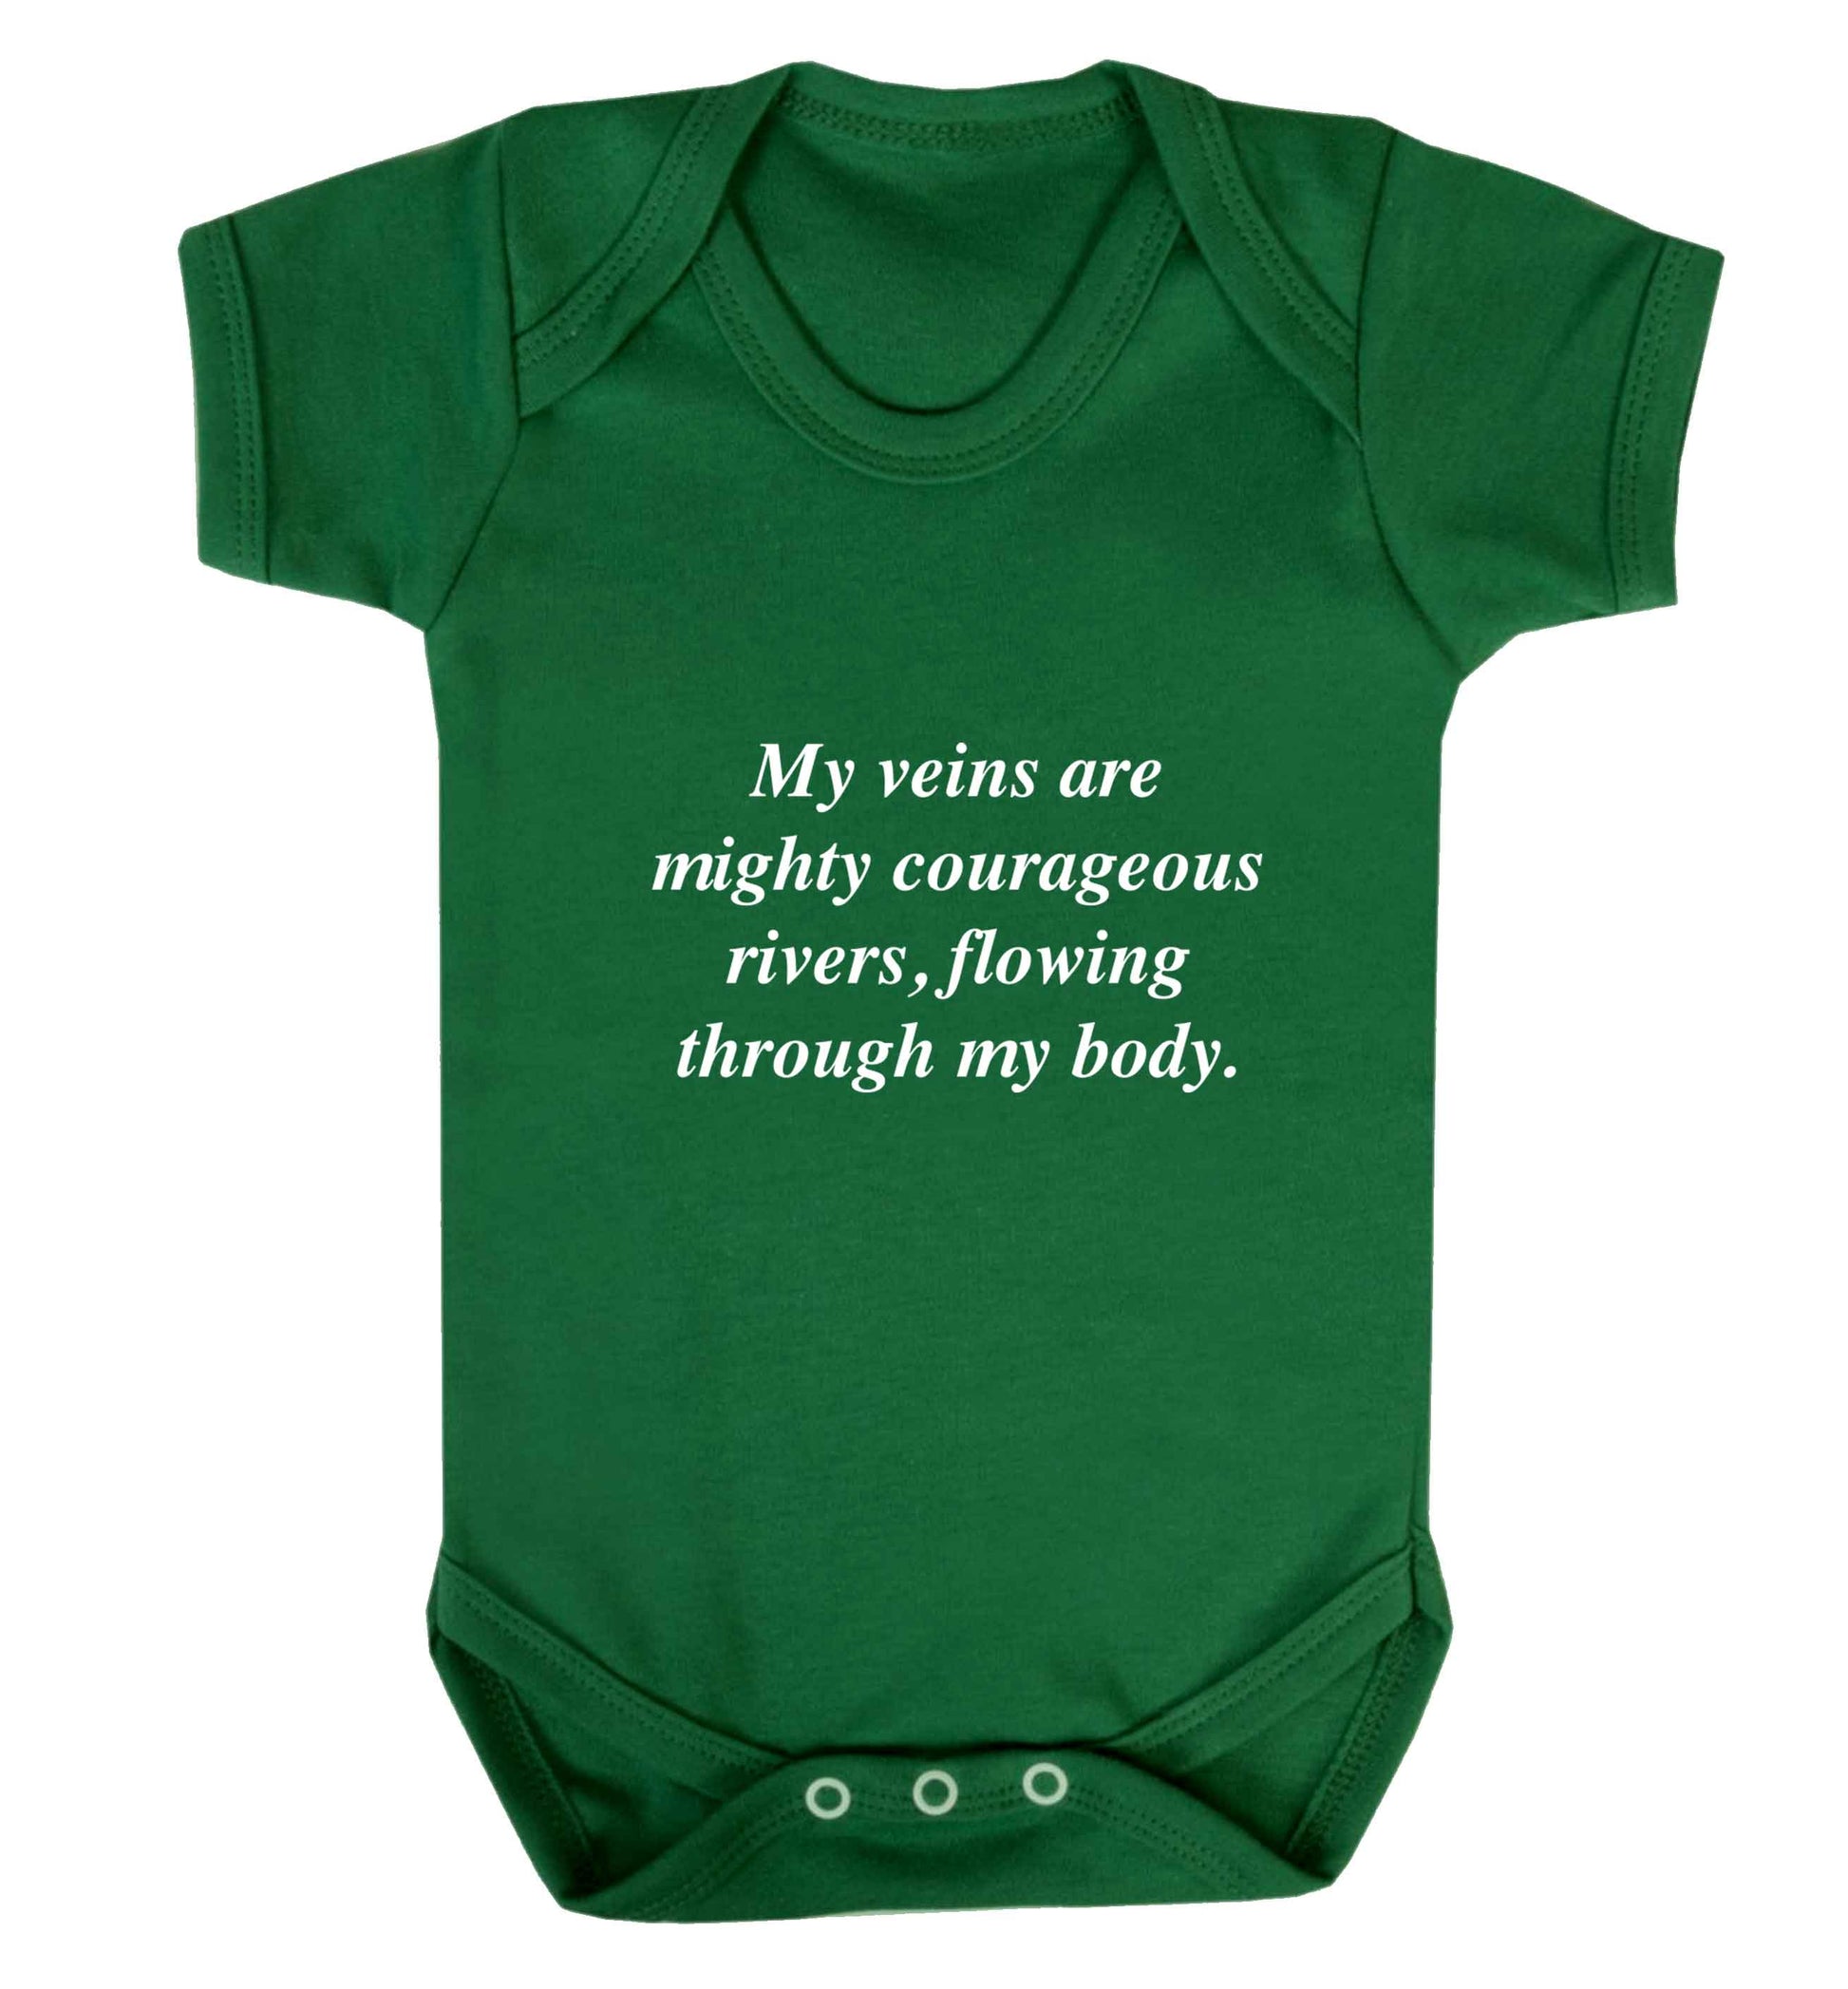 My veins are mighty courageous rivers, flowing through my body baby vest green 18-24 months